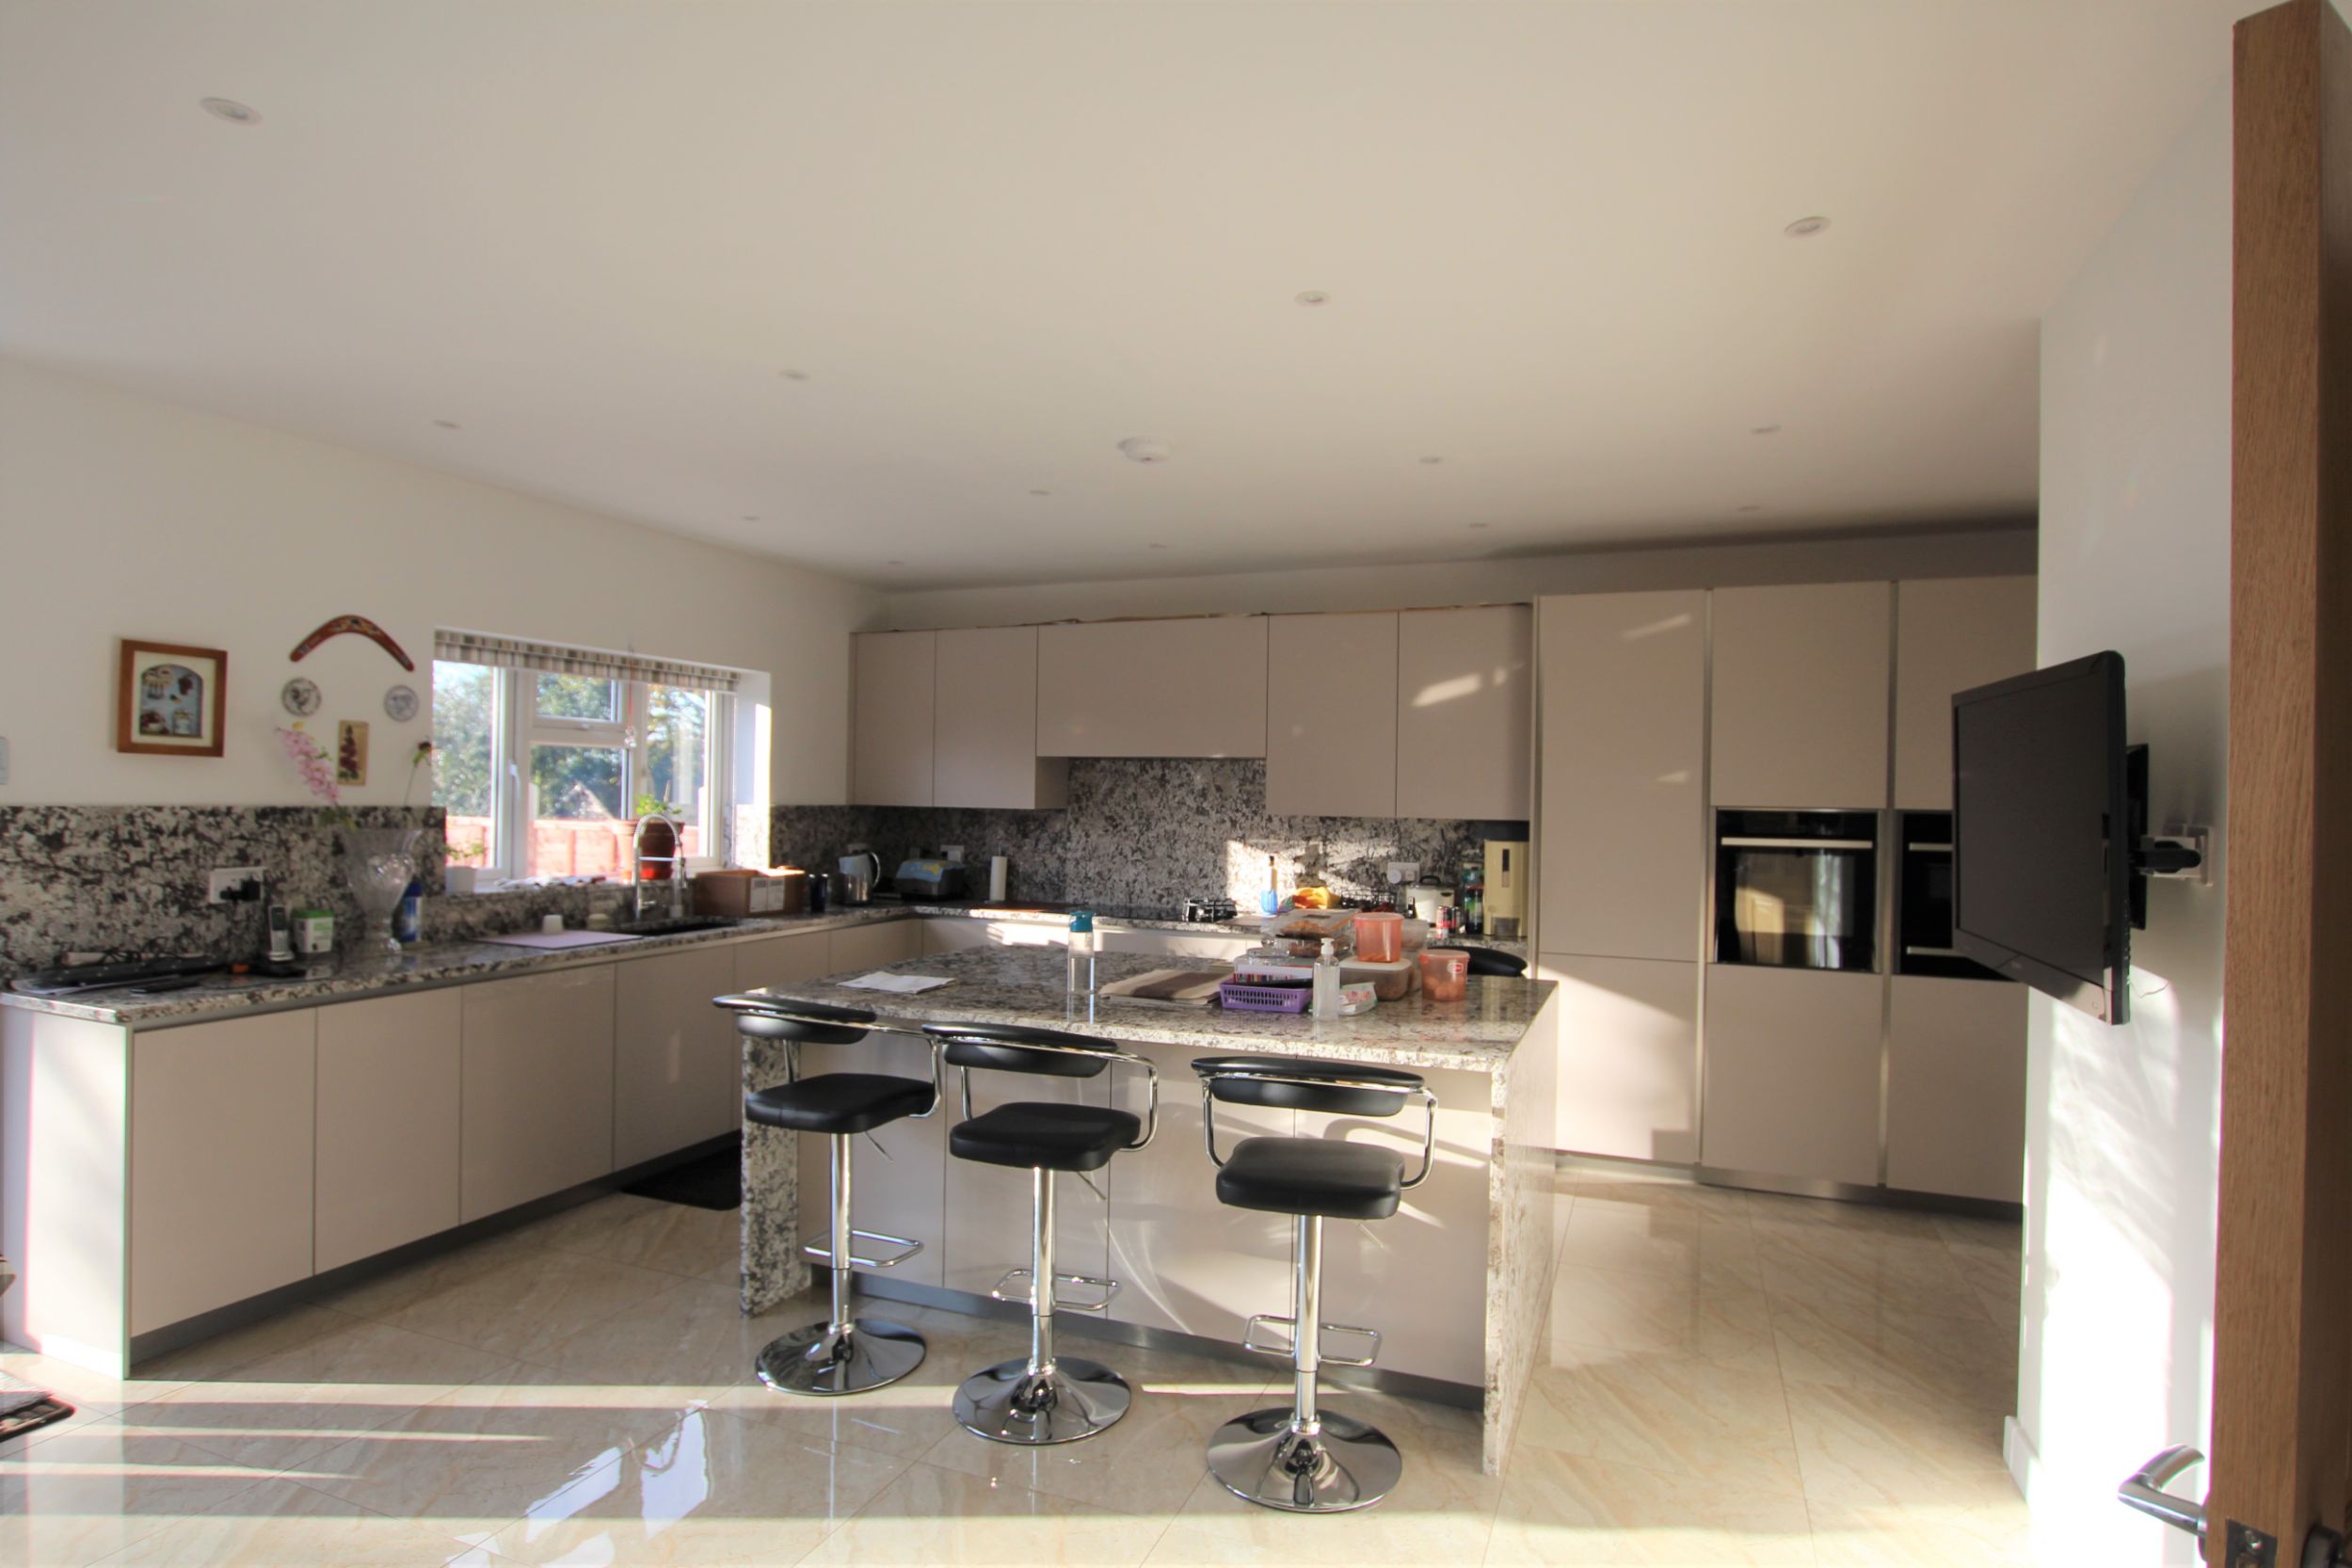 German kitchen designed, supplied and installed in Cockfosters by Hampdens KB